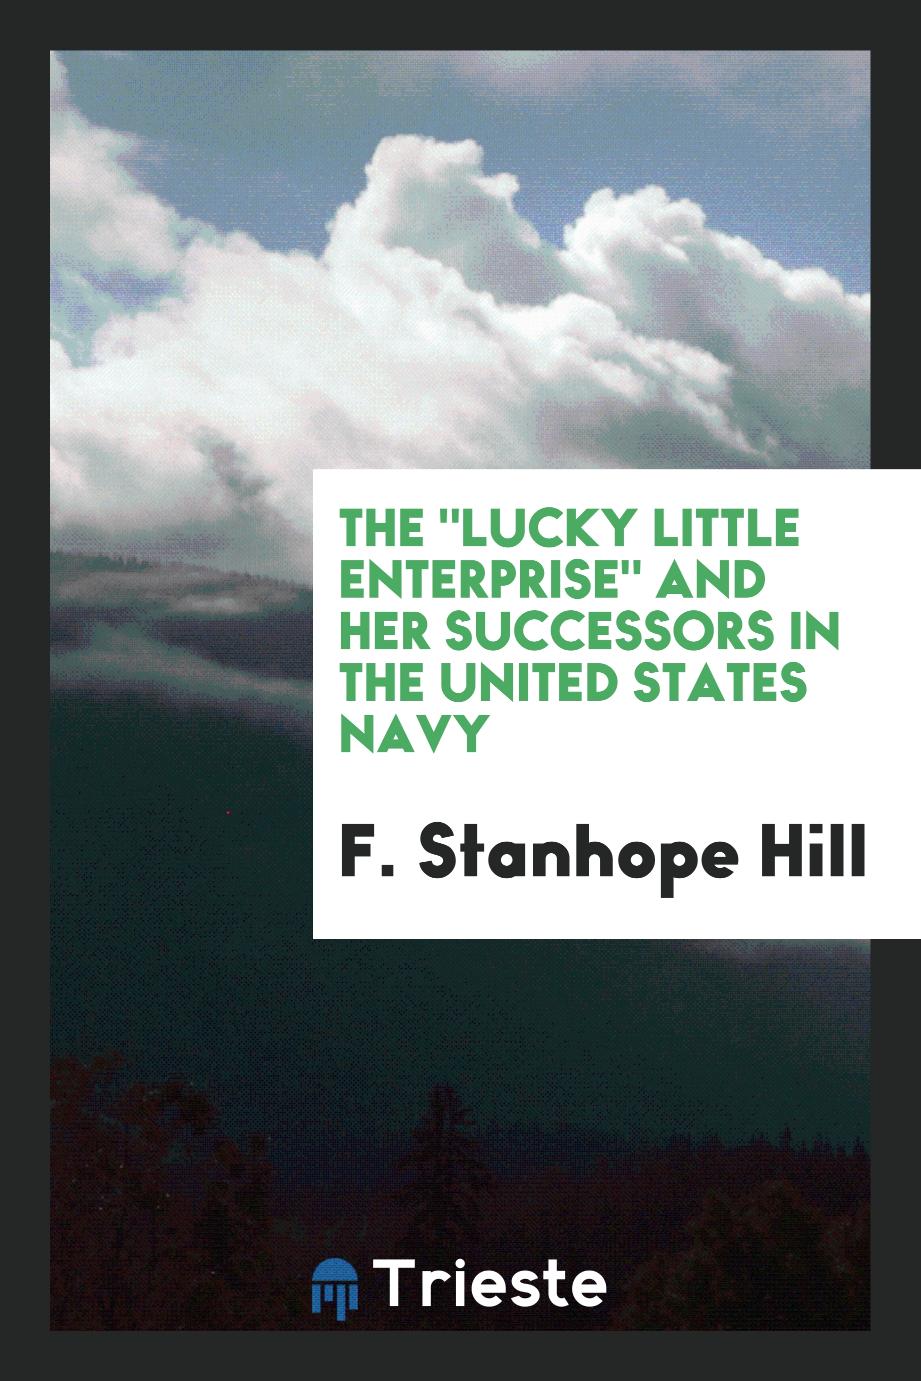 The "Lucky little Enterprise" and her successors in the United States Navy